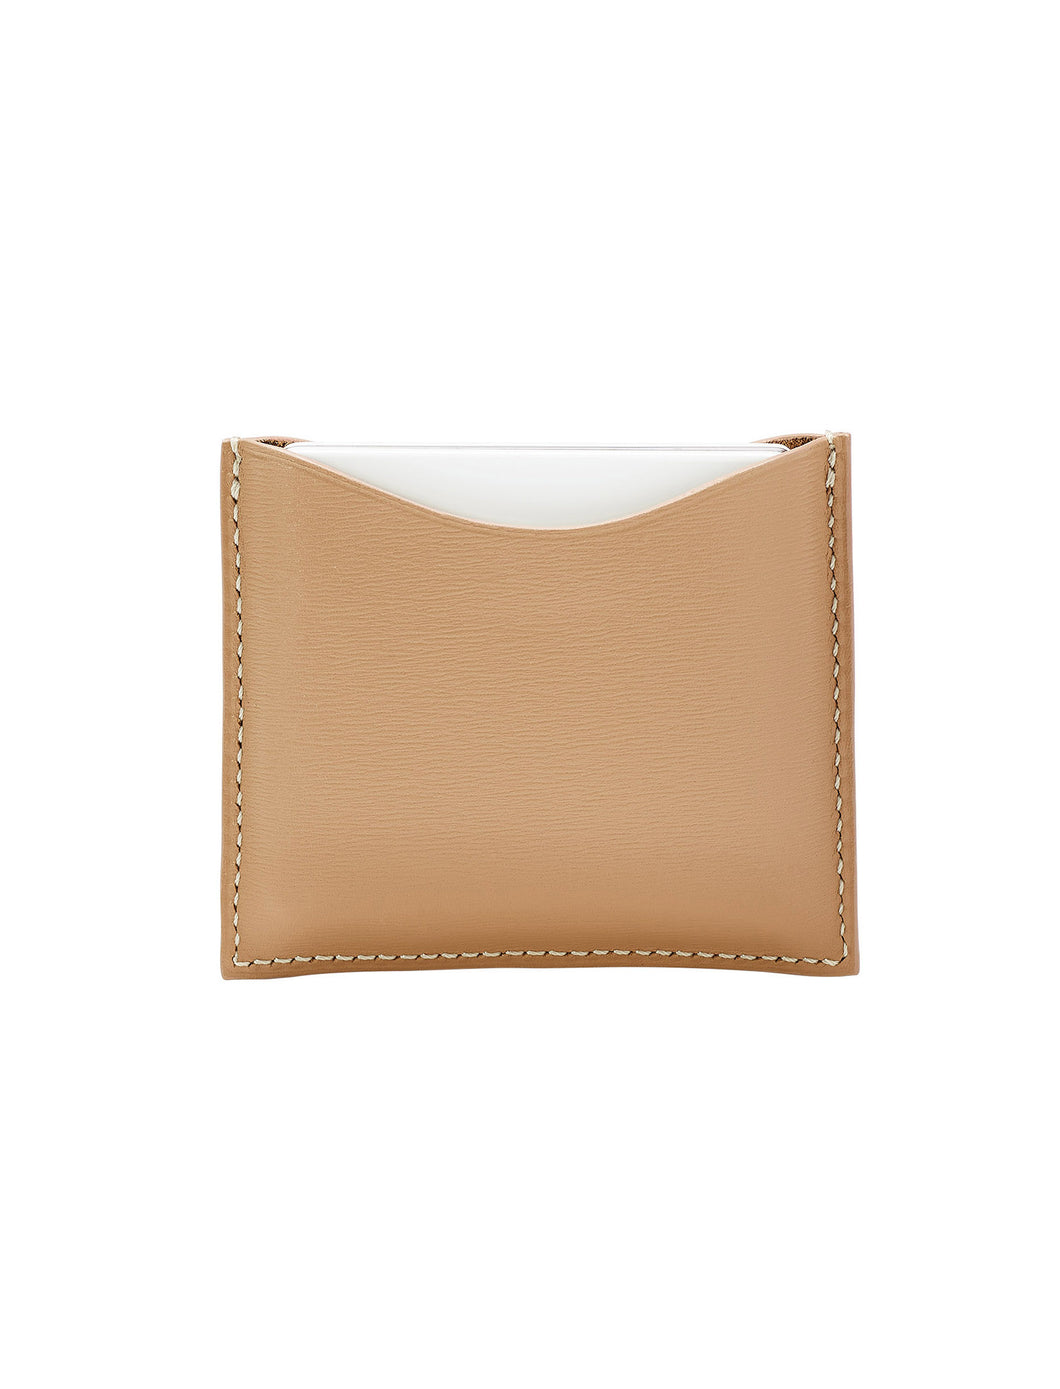 Camel Fine Leather Refillable Compact Case